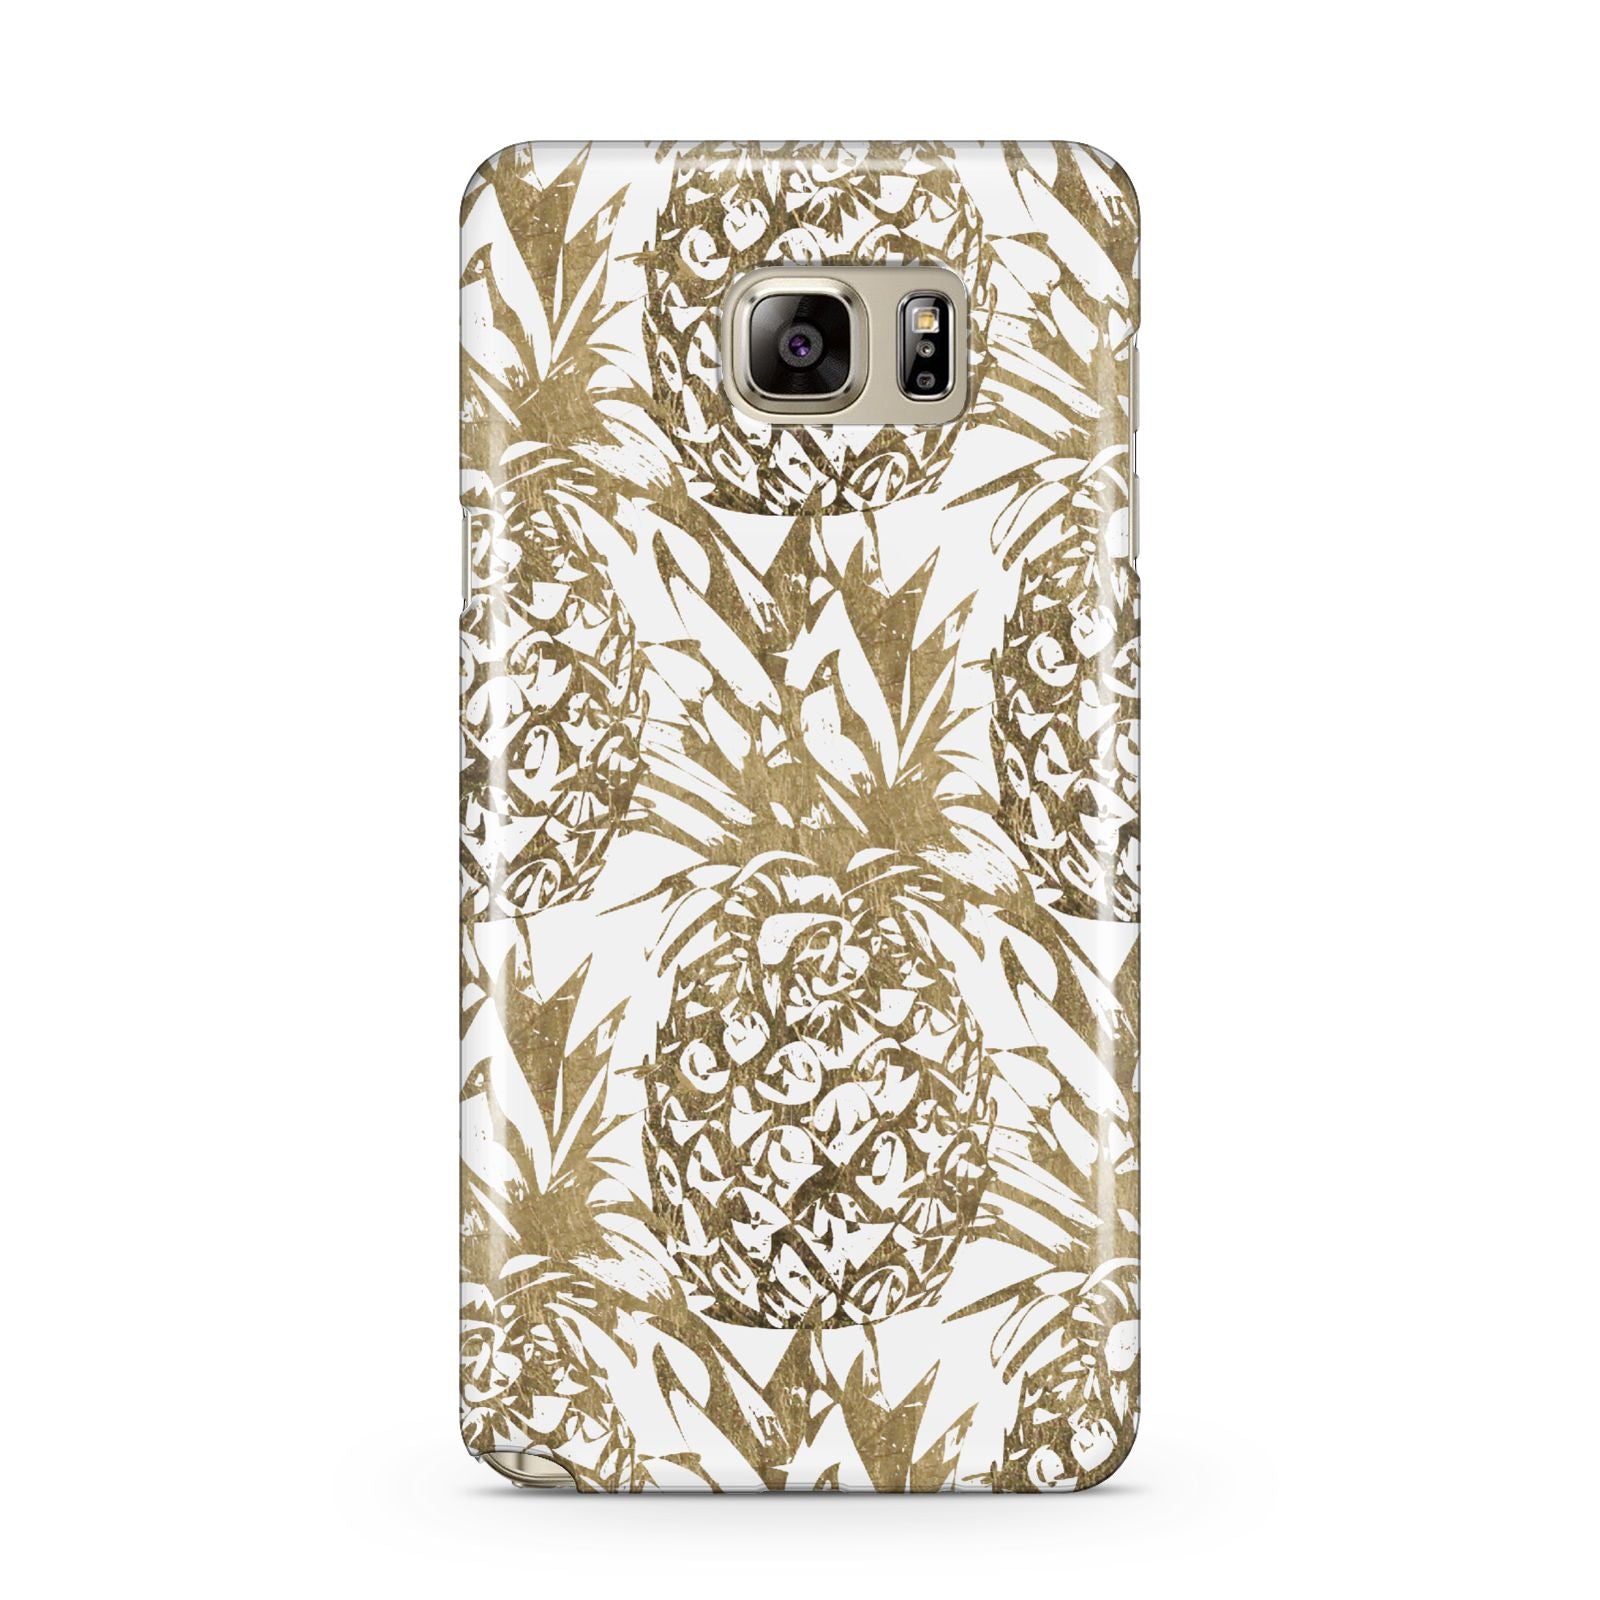 Gold Pineapple Fruit Samsung Galaxy Note 5 Case